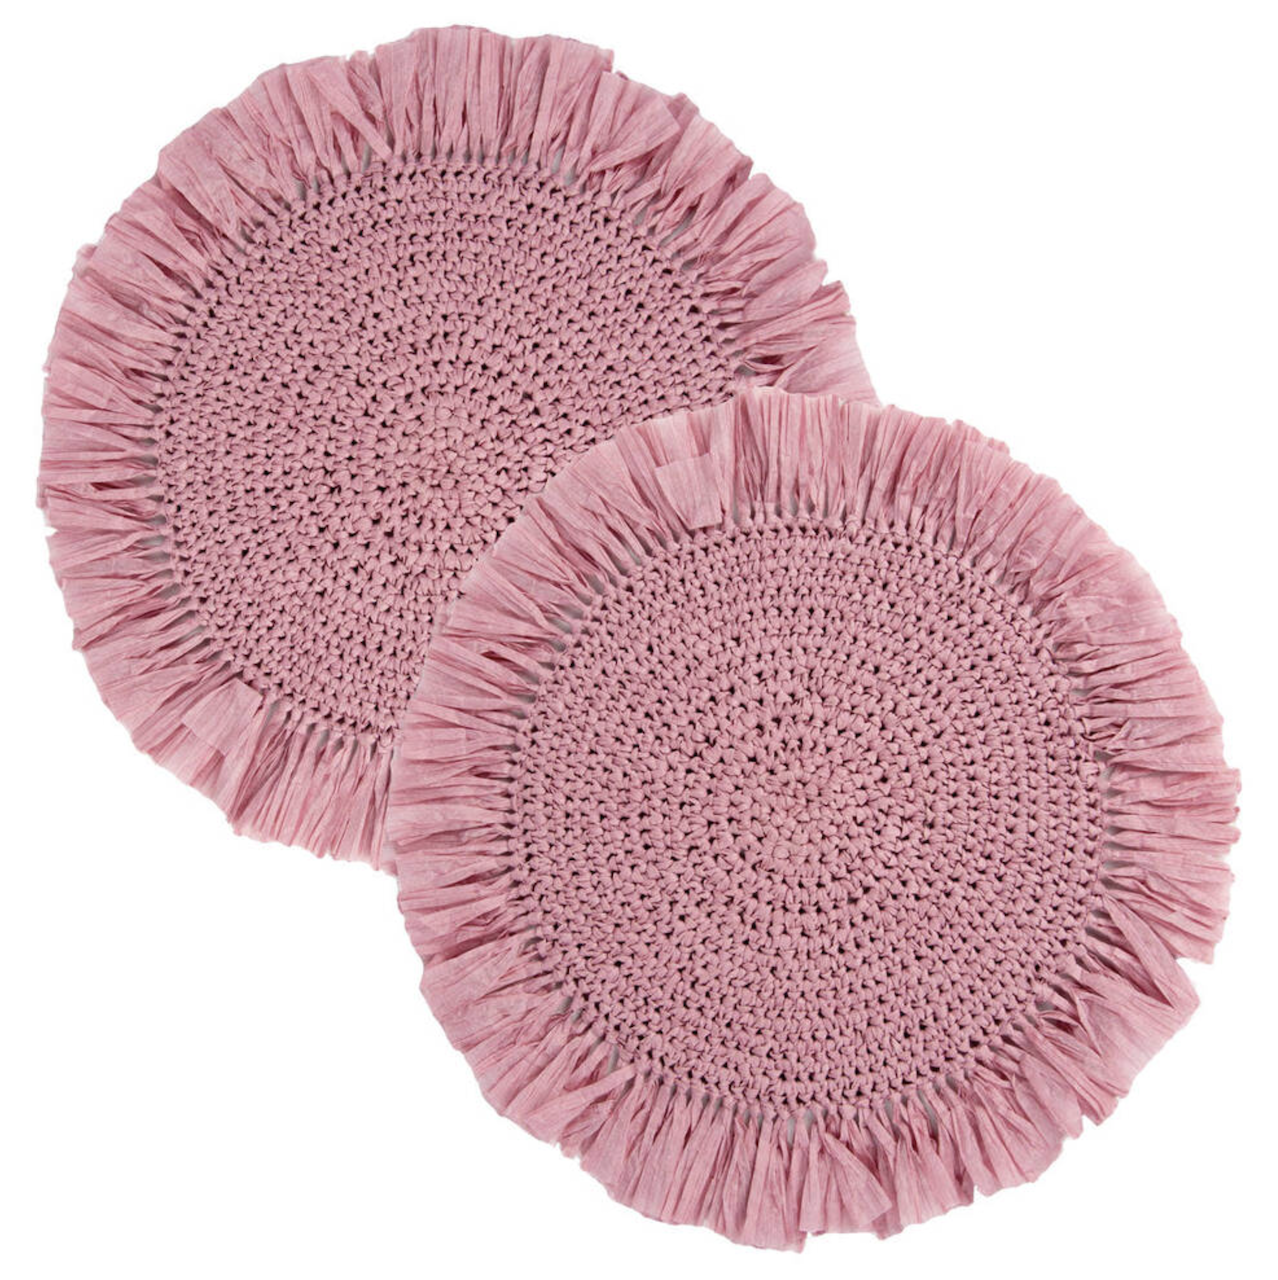 talking-tables-set-of-two-raffia-placemats